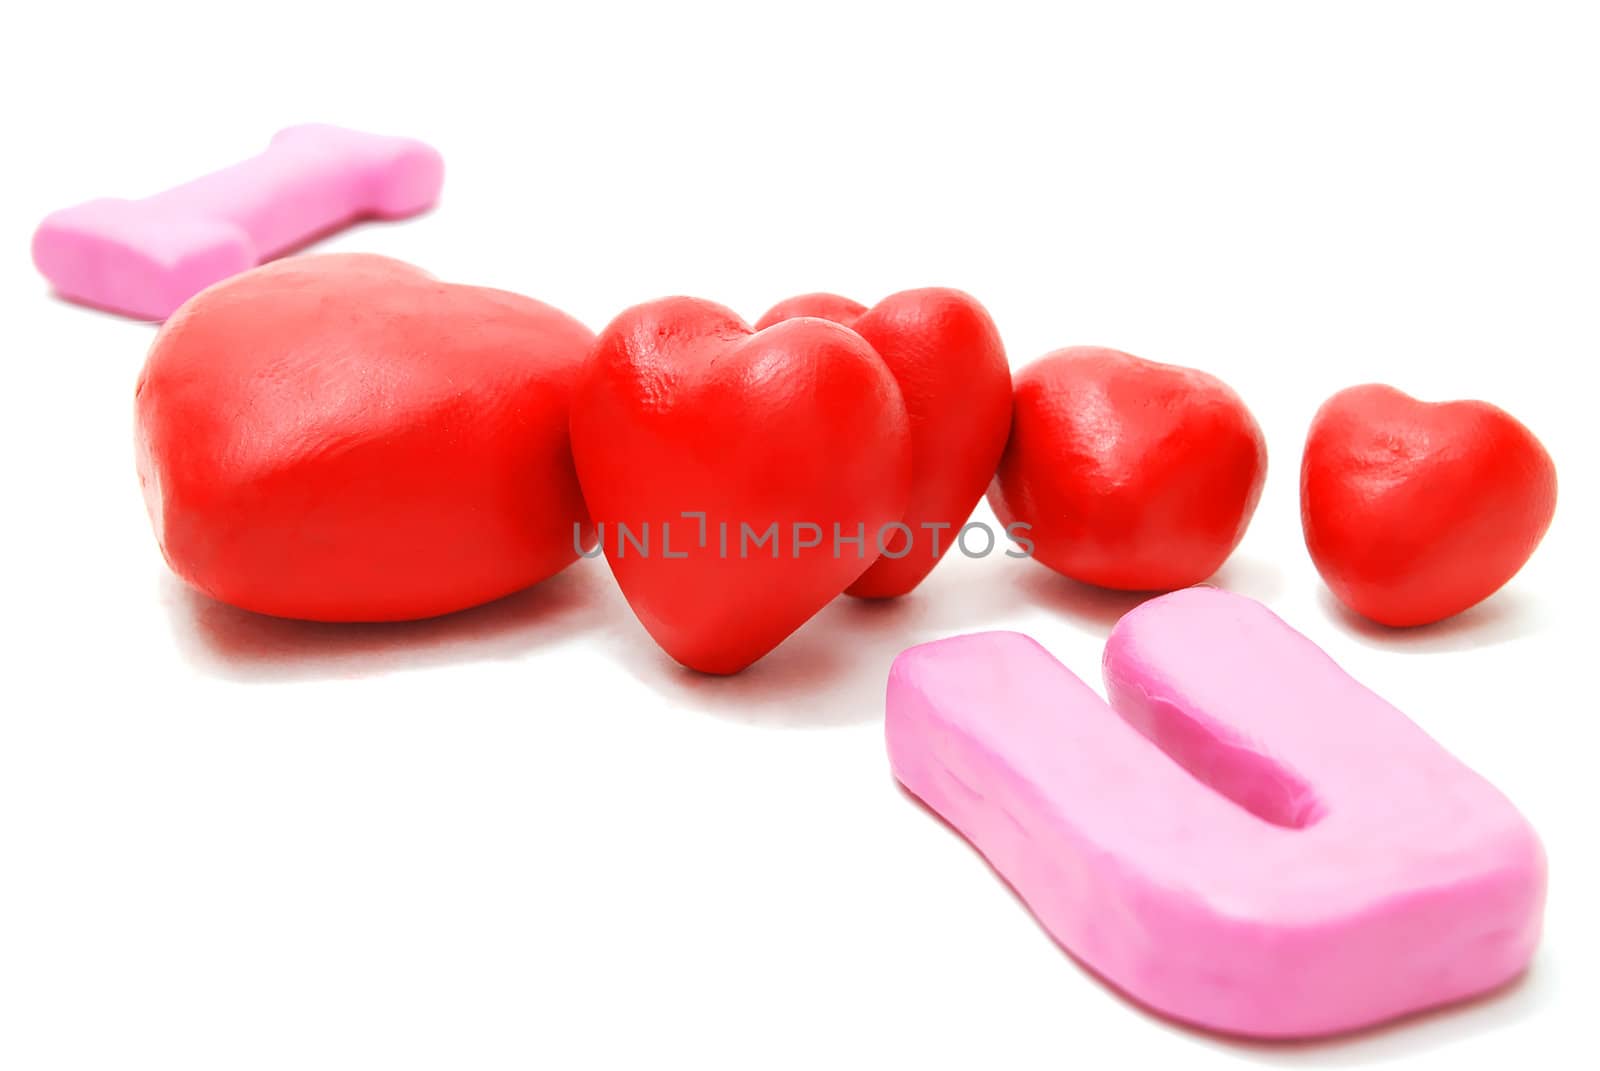 Random Valentine's I Love You Text with Heap of Hearts Made of Red and Pink Plasticine Isolated on White Background